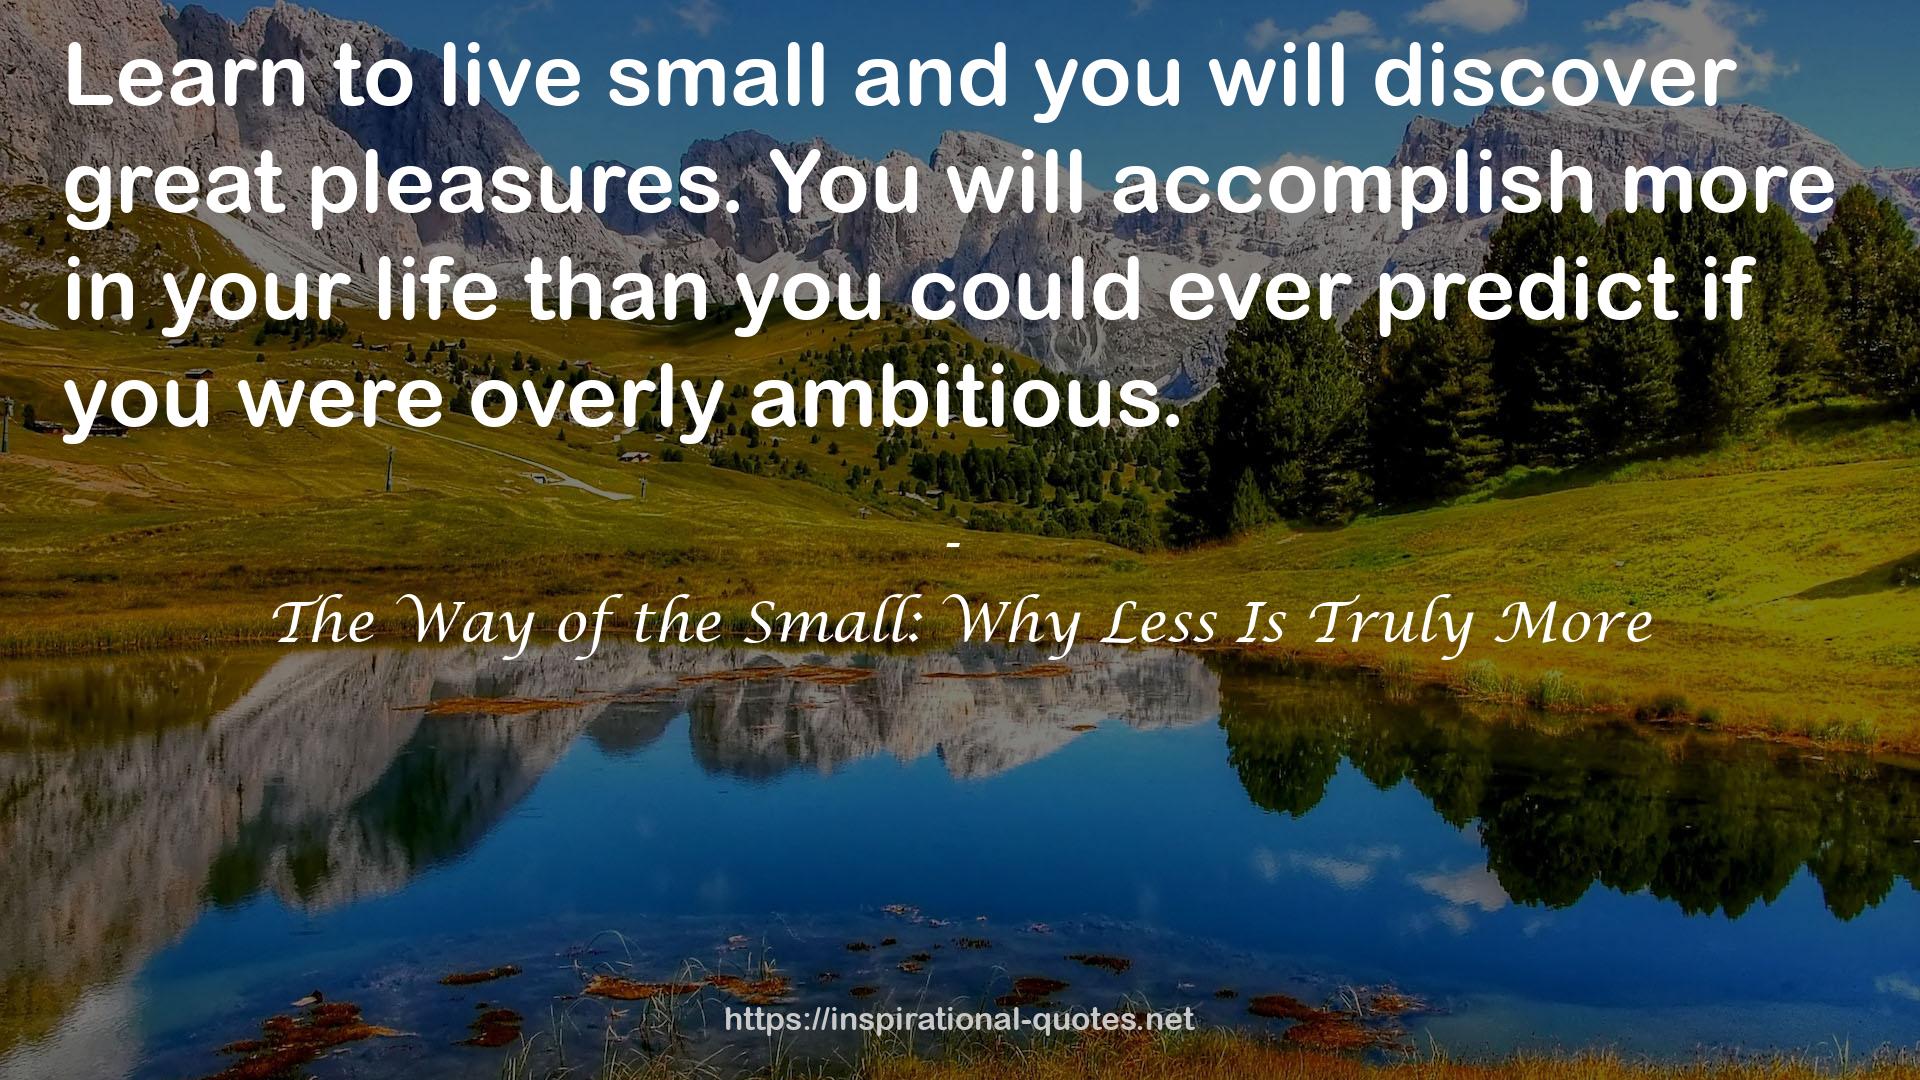 The Way of the Small: Why Less Is Truly More QUOTES